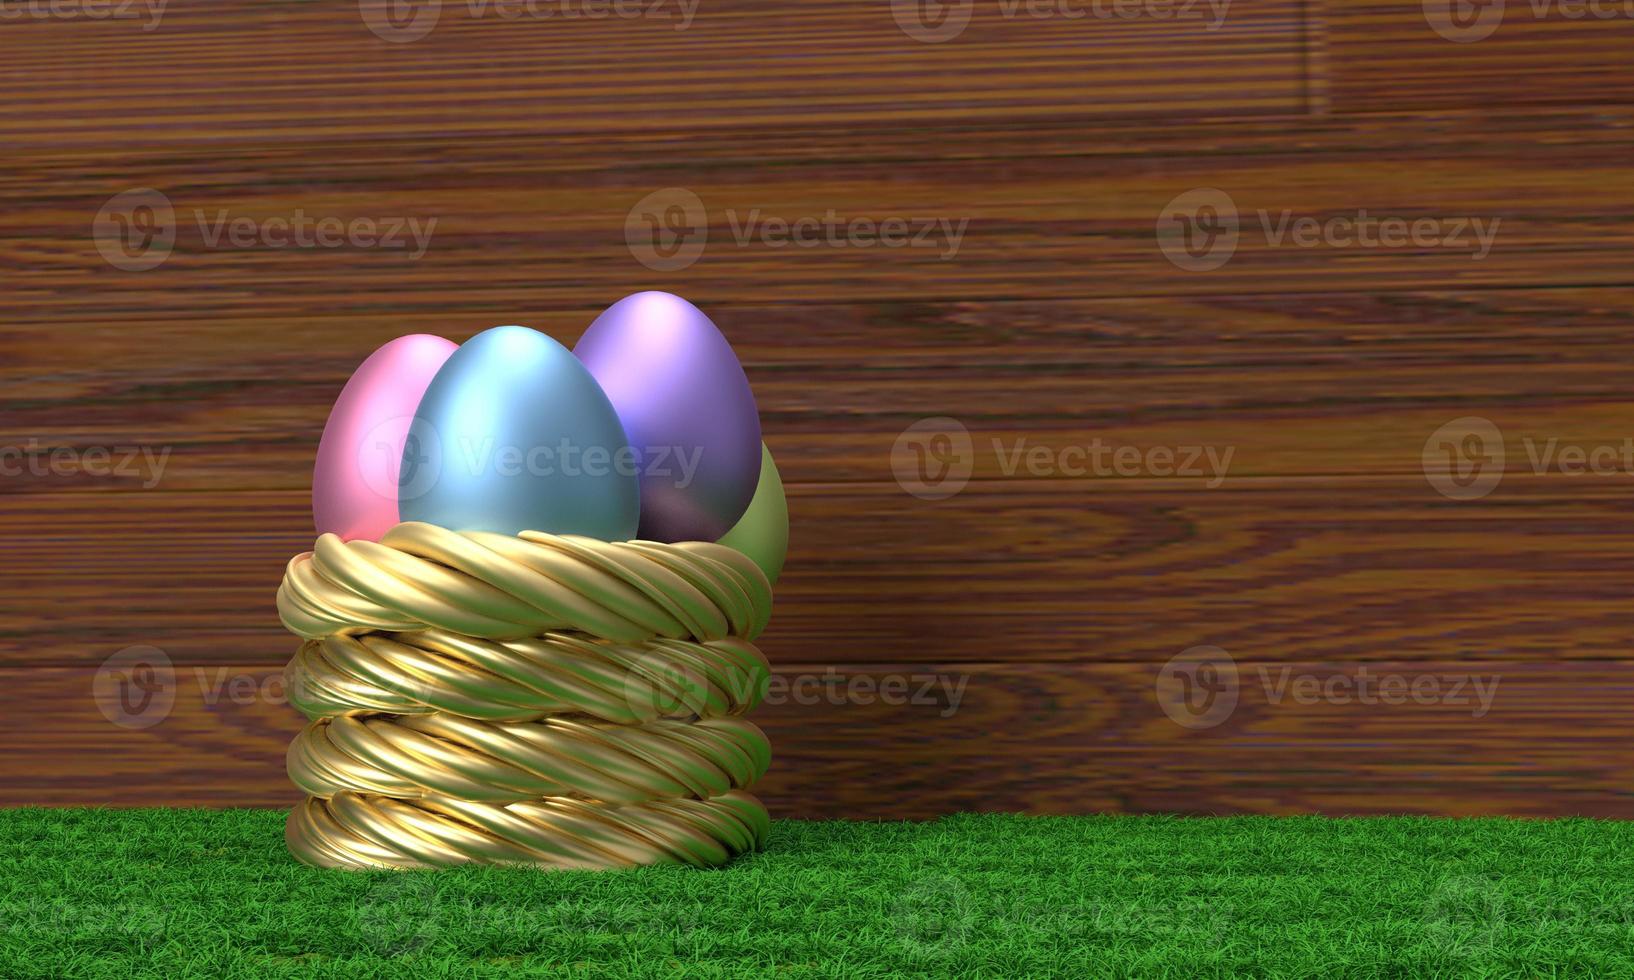 Nest basket golden yellow orange line gradient color wooden oak background copy space grass green color natural spring season time happy easter egg animal chicken april month object holiday .3d render photo